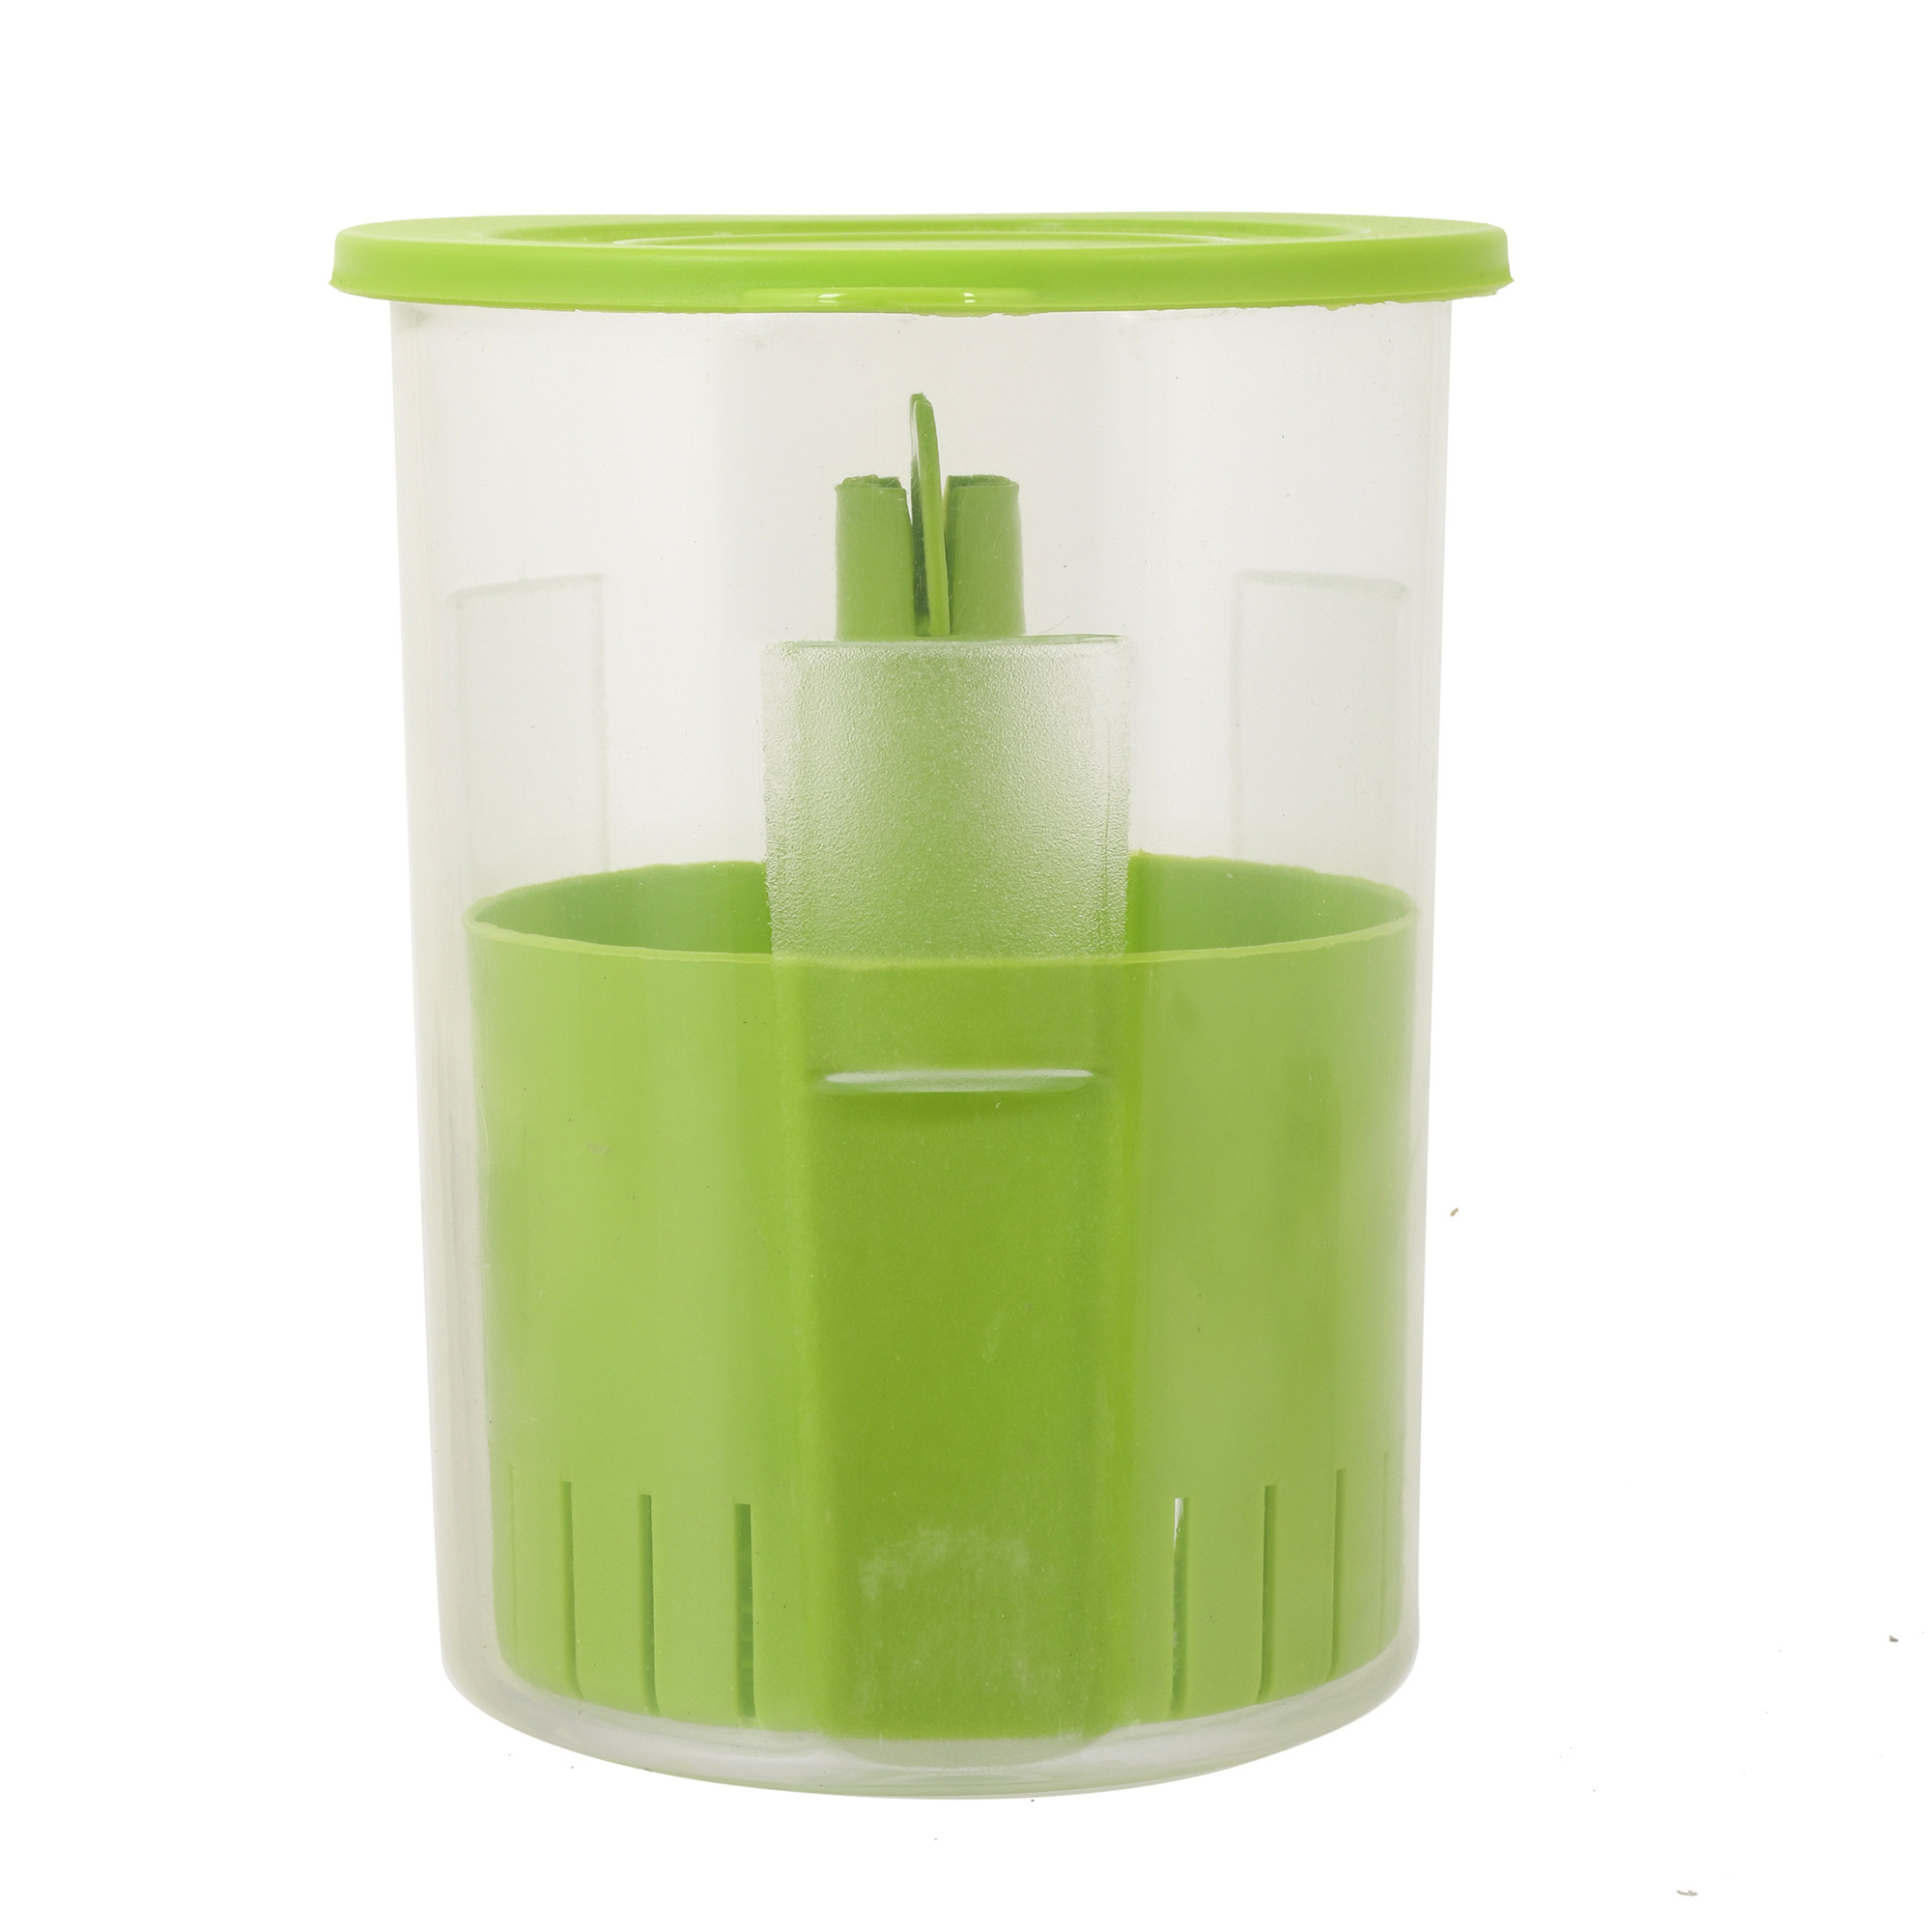 Kuber Industries Oil Less Unbreakable Plastic Pickle Container,Dinning Table Storage Container for Chutney,Pickles,Achar,Spices,Jam,Ketchup Kitchen Storage,Jars,1000 Ml (Green)